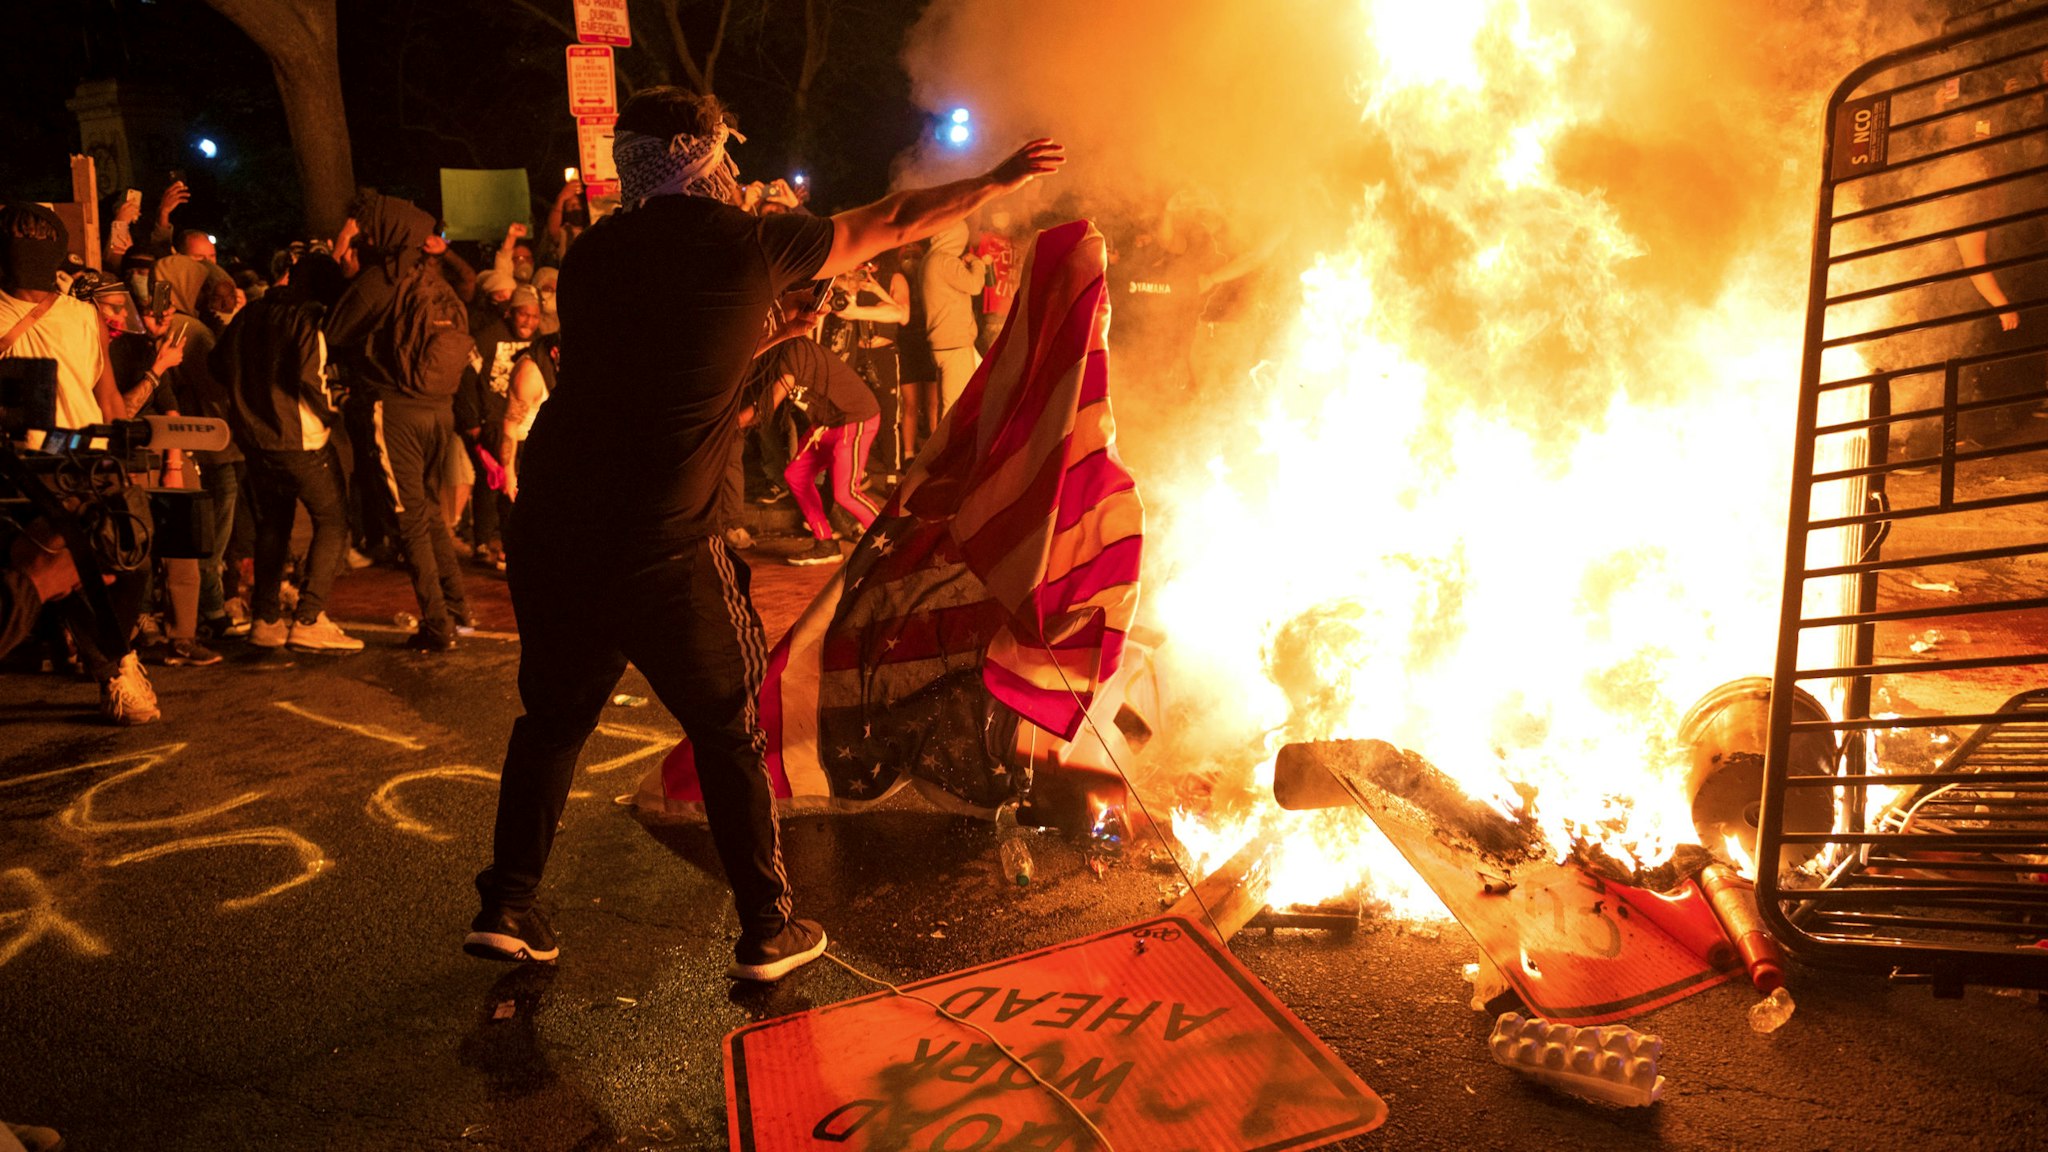 A protester throws a US flag into a burning barricade during a demonstration against the death of George Floyd near the White House on May 31, 2020 in Washington, DC. - Thousands of National Guard troops patrolled major US cities after five consecutive nights of protests over racism and police brutality that boiled over into arson and looting, sending shock waves through the country. The death Monday of an unarmed black man, George Floyd, at the hands of police in Minneapolis ignited this latest wave of outrage in the US over law enforcement's repeated use of lethal force against African Americans -- this one like others before captured on cellphone video.